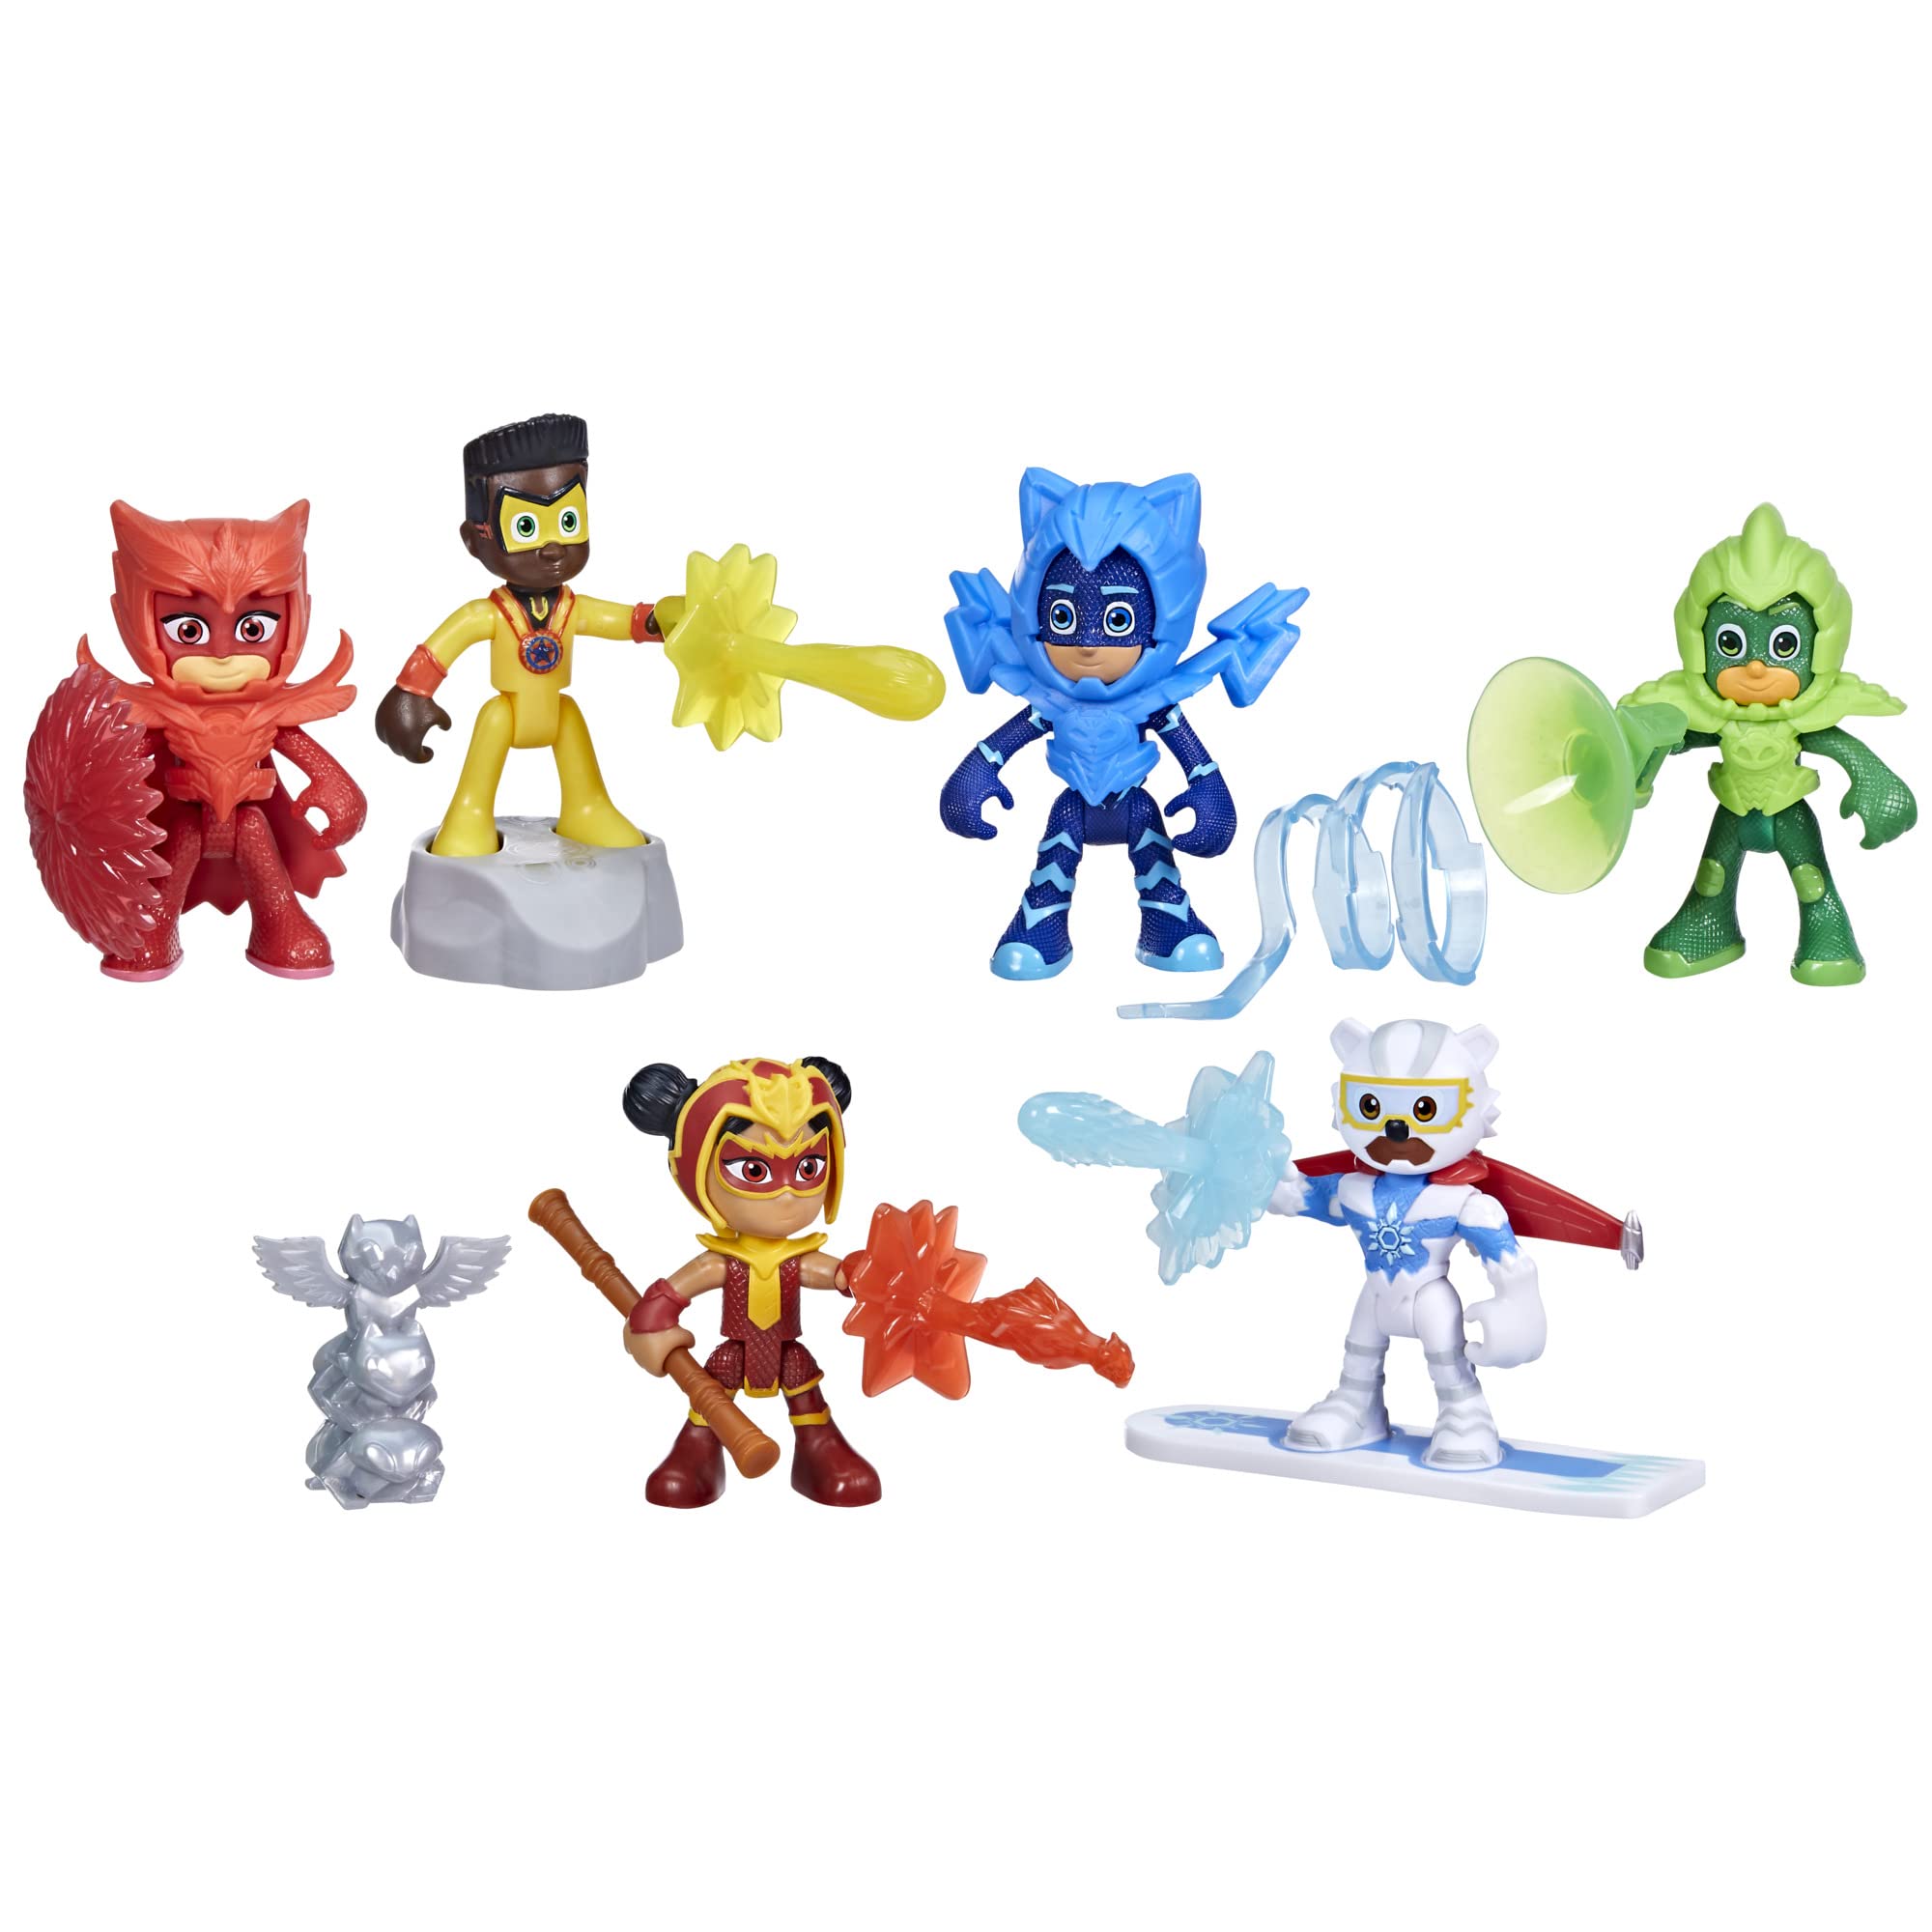 PJ Masks Power Heroes Meet The Power Heroes Figure Set with 6 Figures and 14 Accessories, Preschool Toys for Kids 3 Years and Up